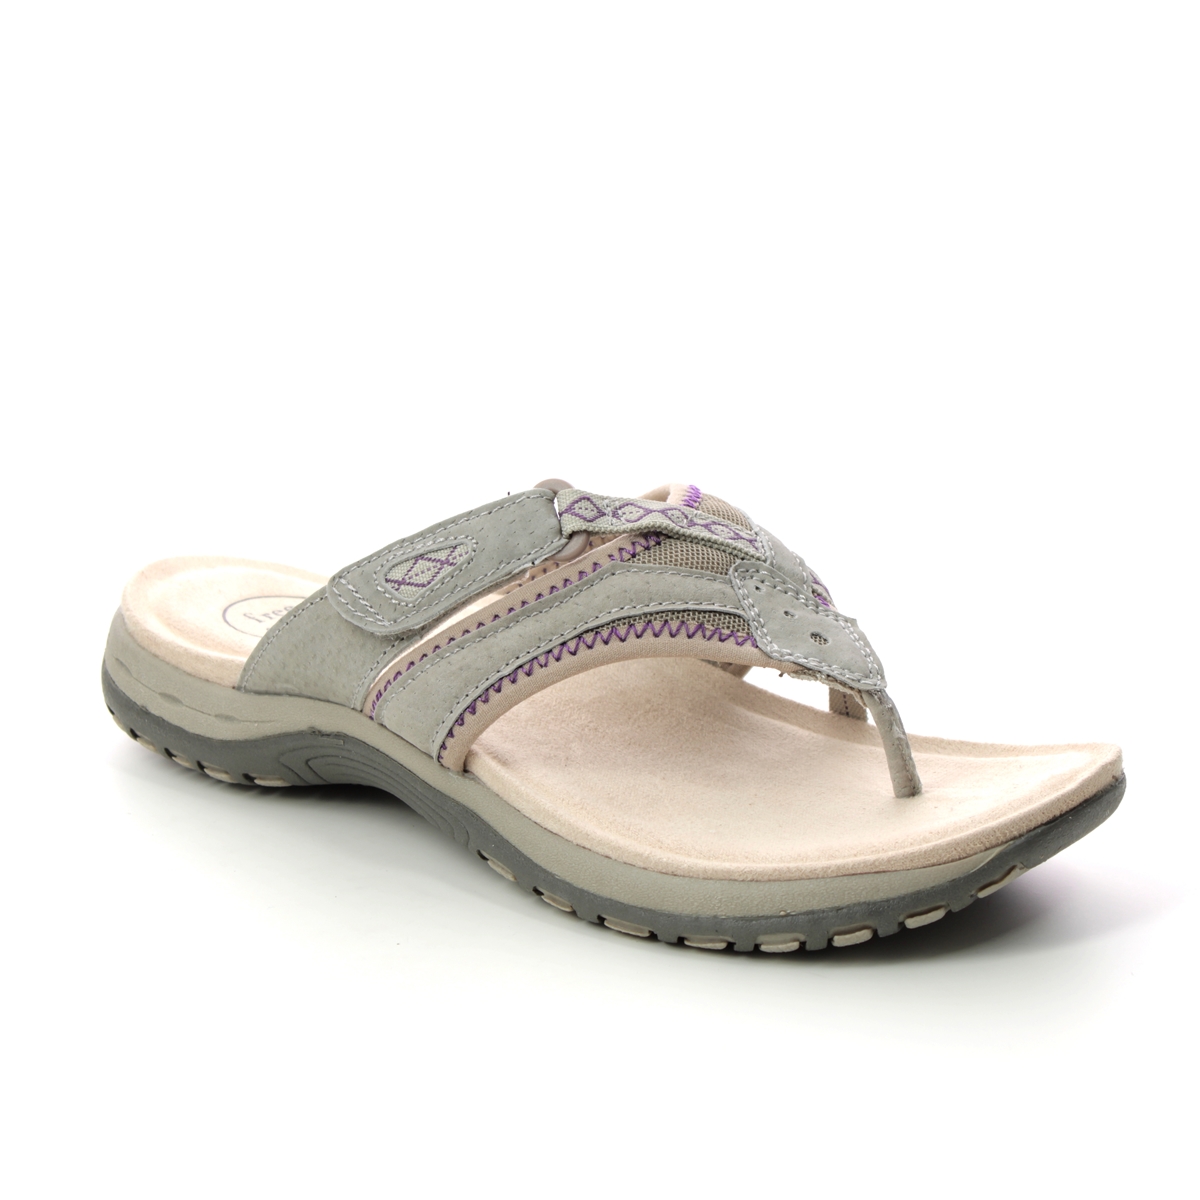 Earth Spirit Juliet 01 Light taupe Womens Toe Post Sandals 40509-50 in a Plain Leather in Size 8